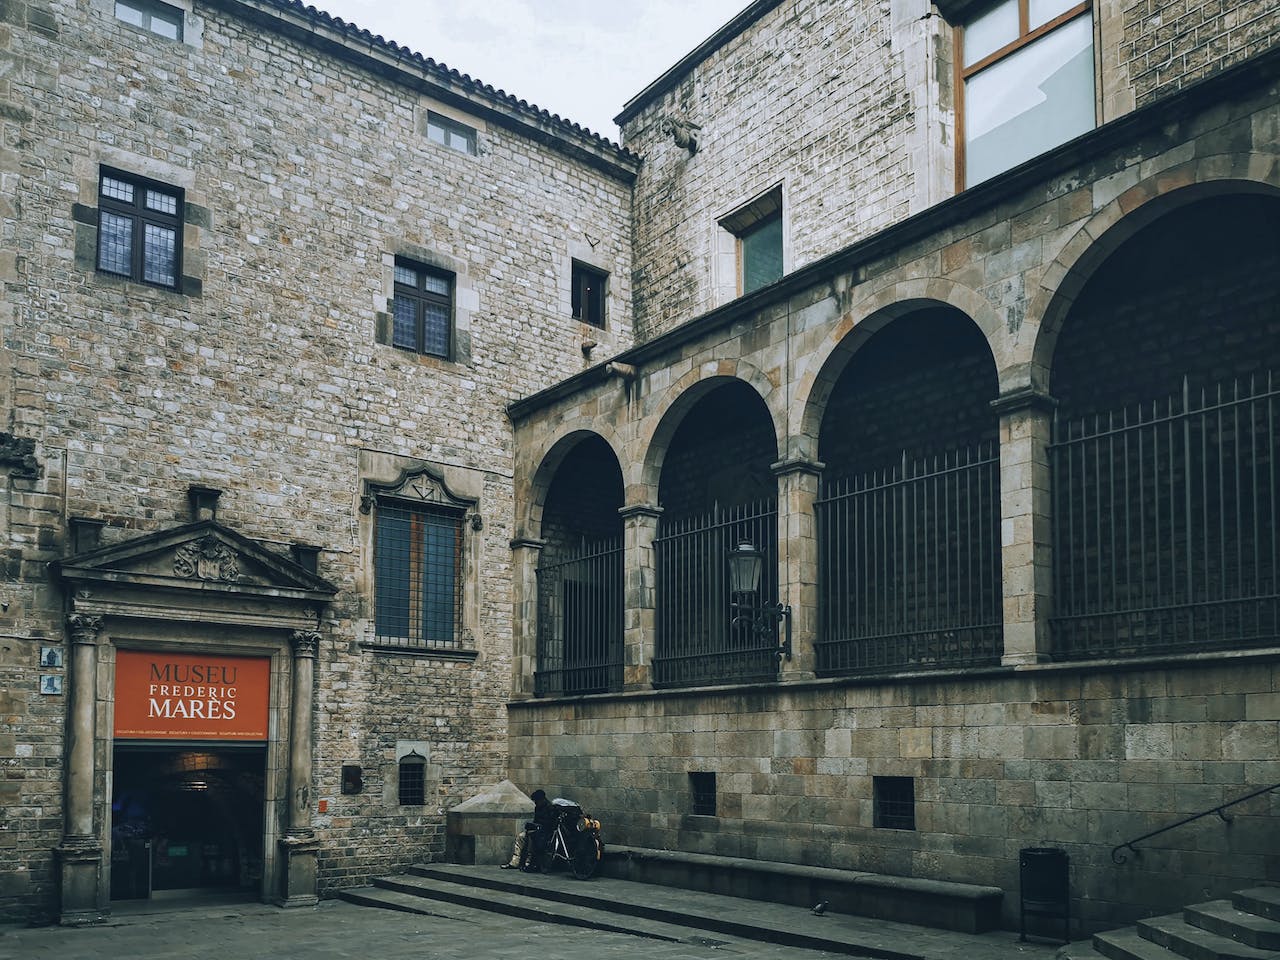 Entrance to the Museu Frederic Marès in Barcelona 